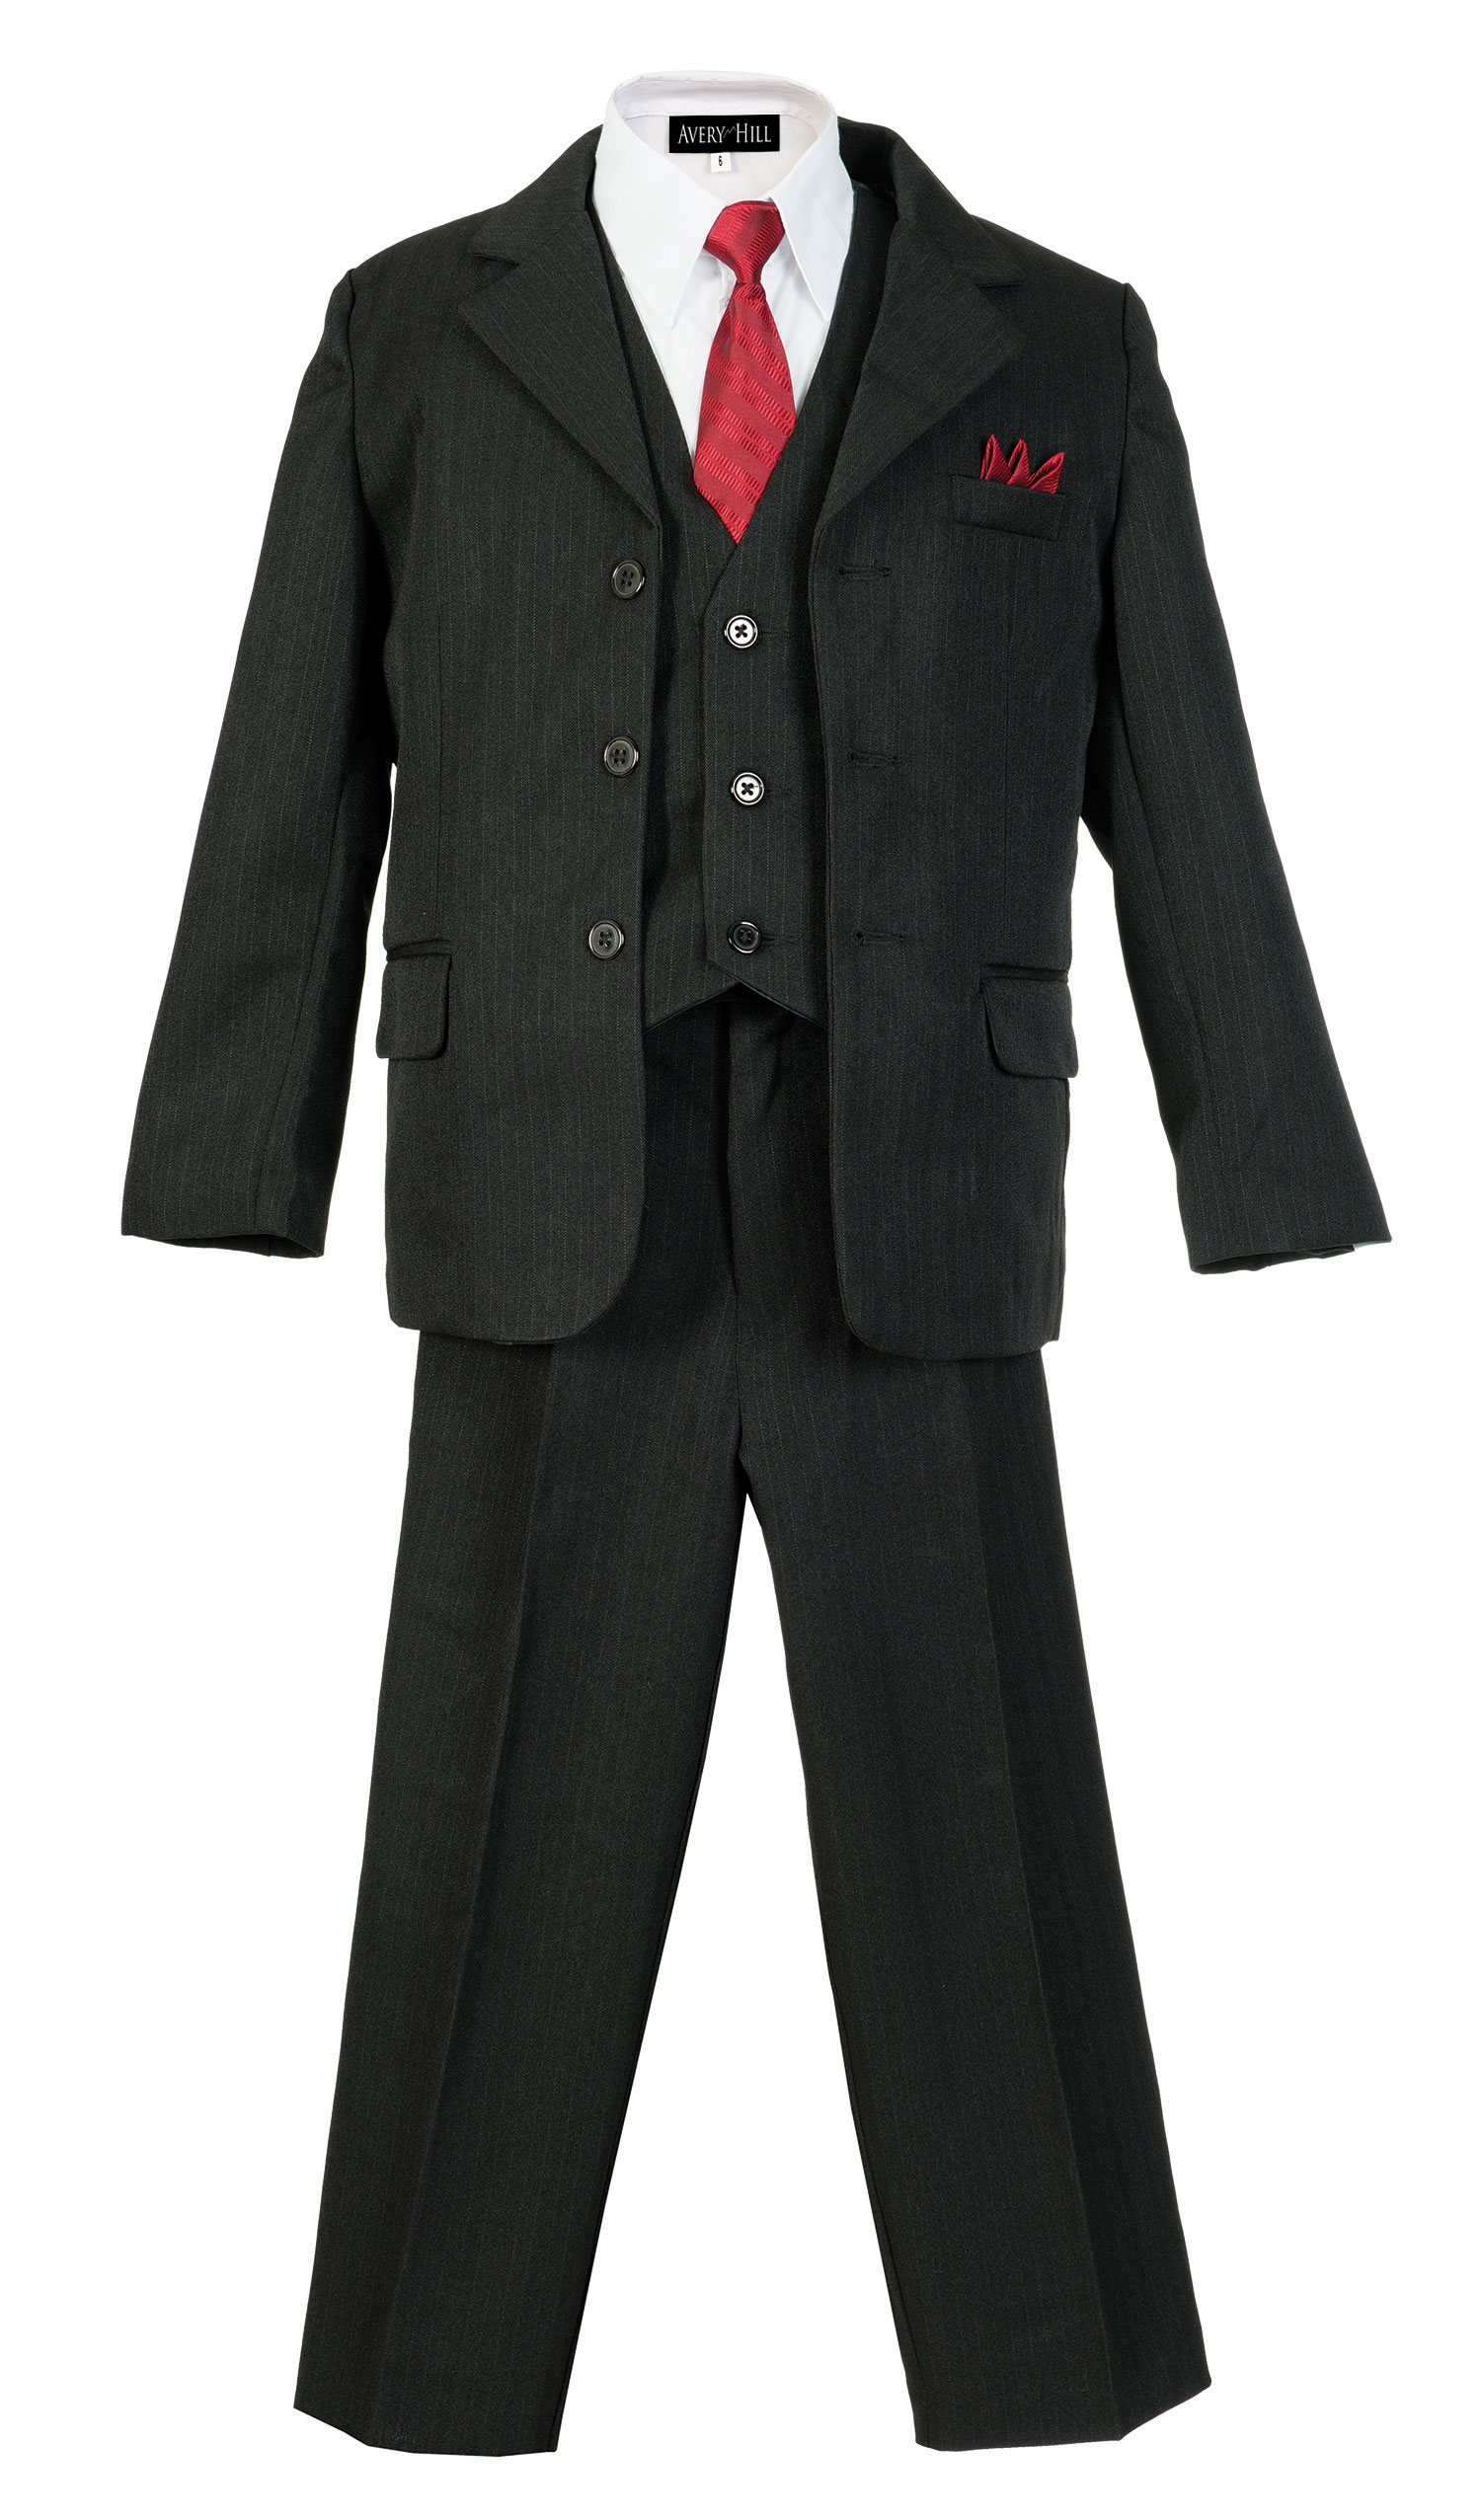 Boys Pinstripe Suit Set with Matching Tie BK 18